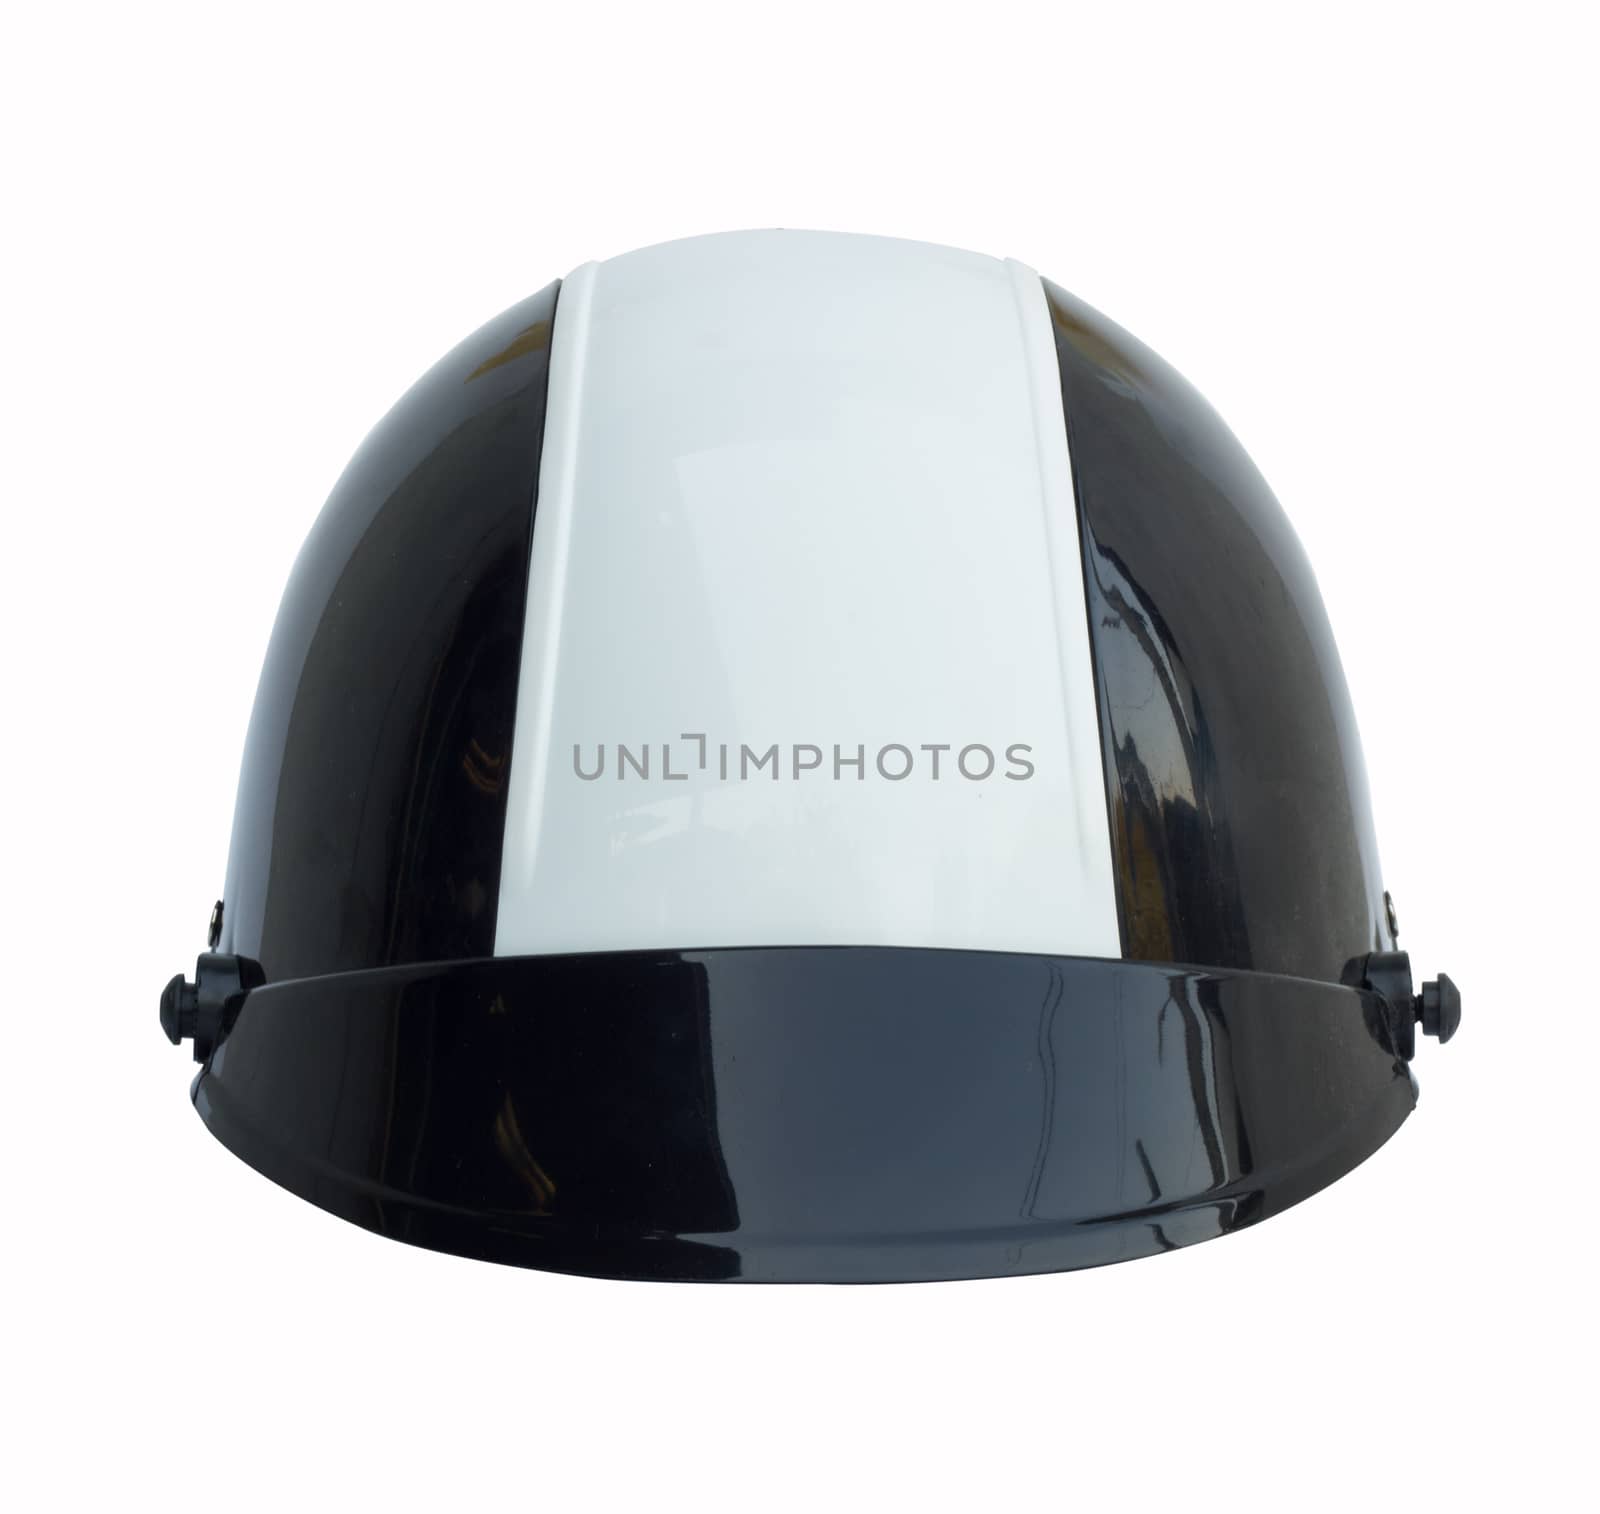 black motorcycle helmet with white striped isolated on white background